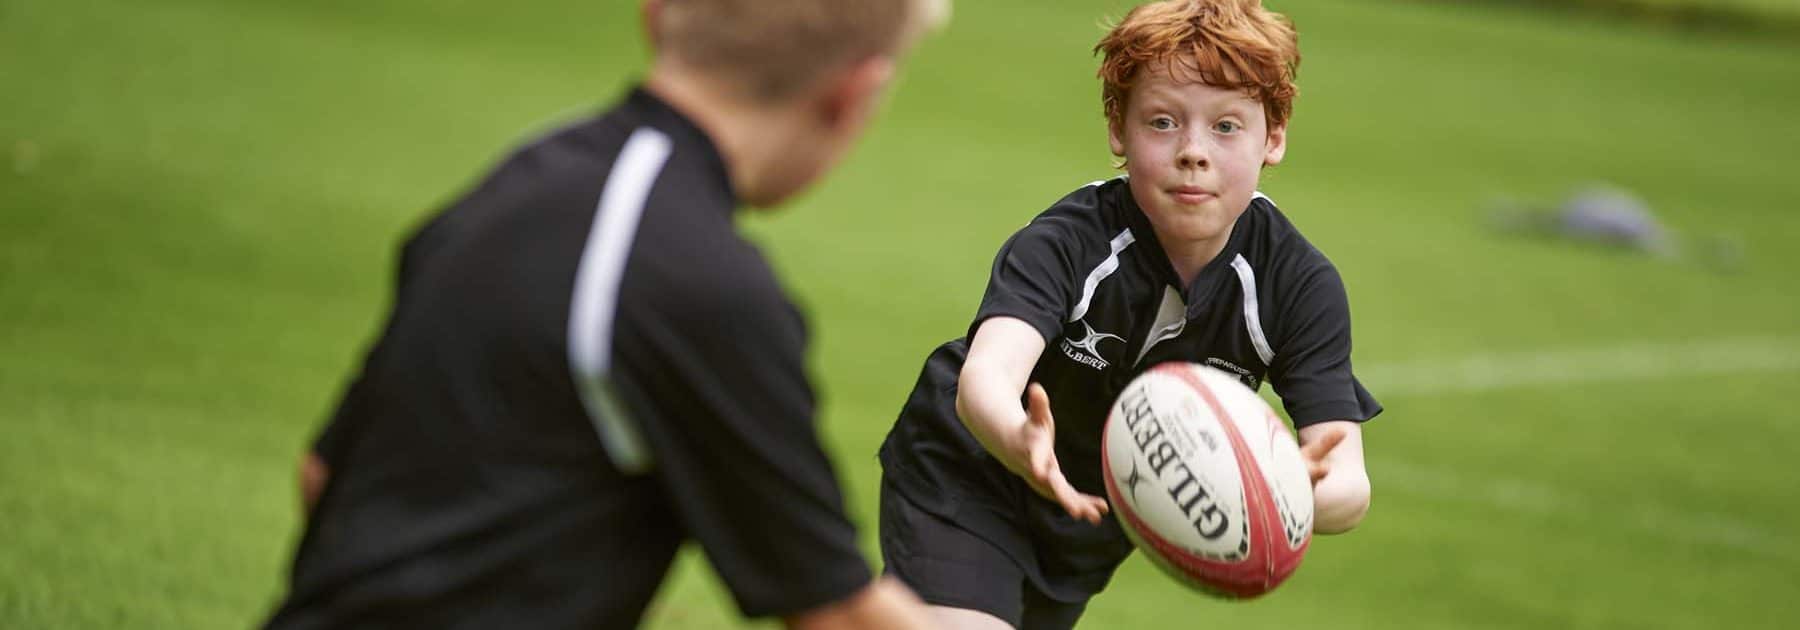 Passport to Sport Launches After Half Term